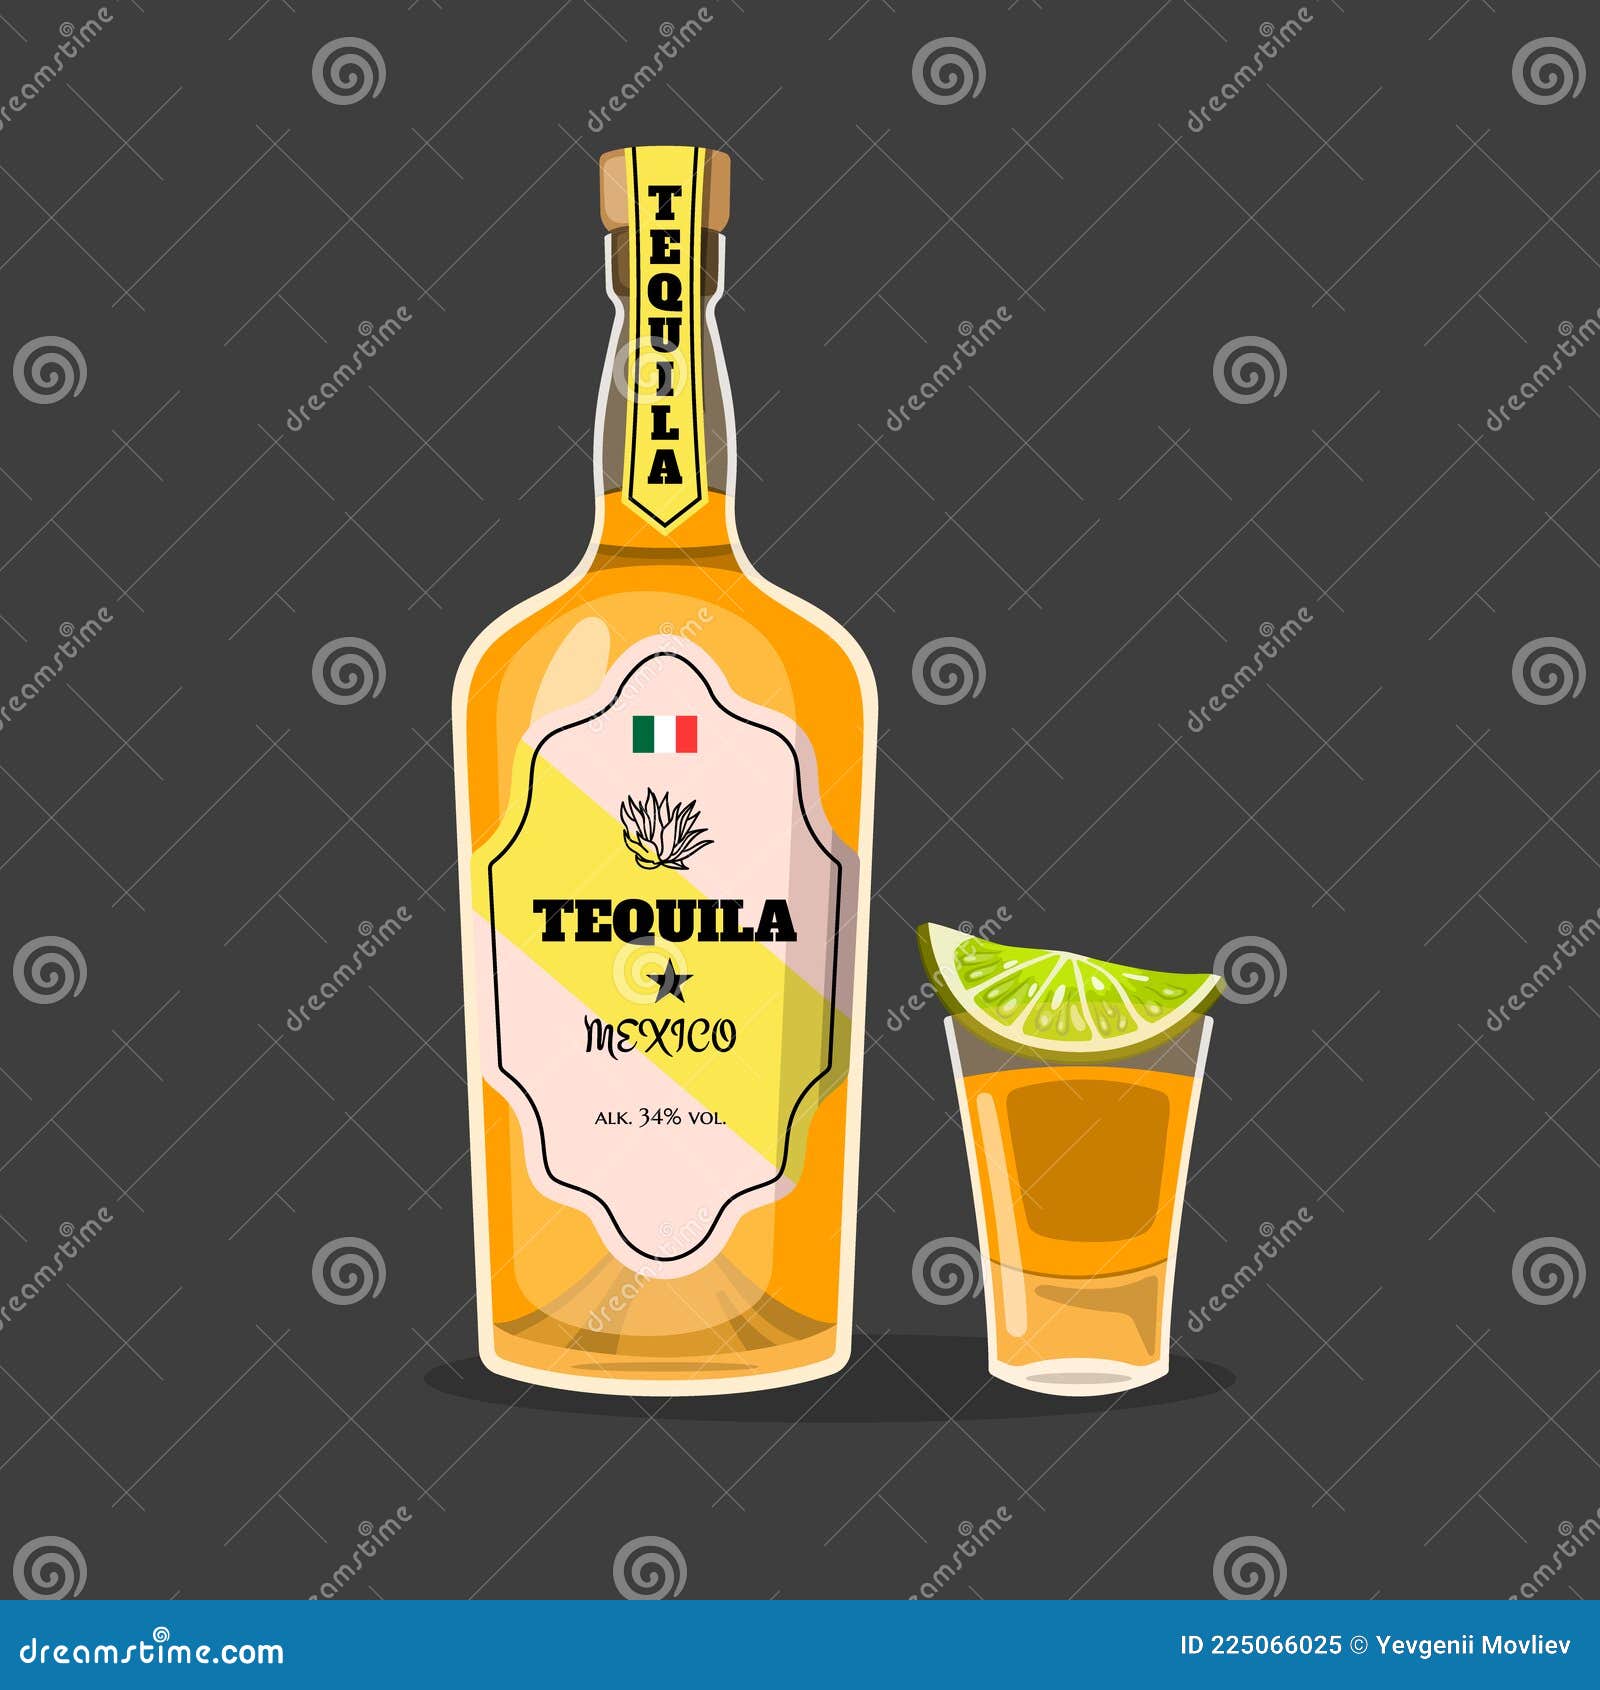 Cartoon Tequila Bottle. Mexican Alcohol. Isolated Drawing of Mexico ...